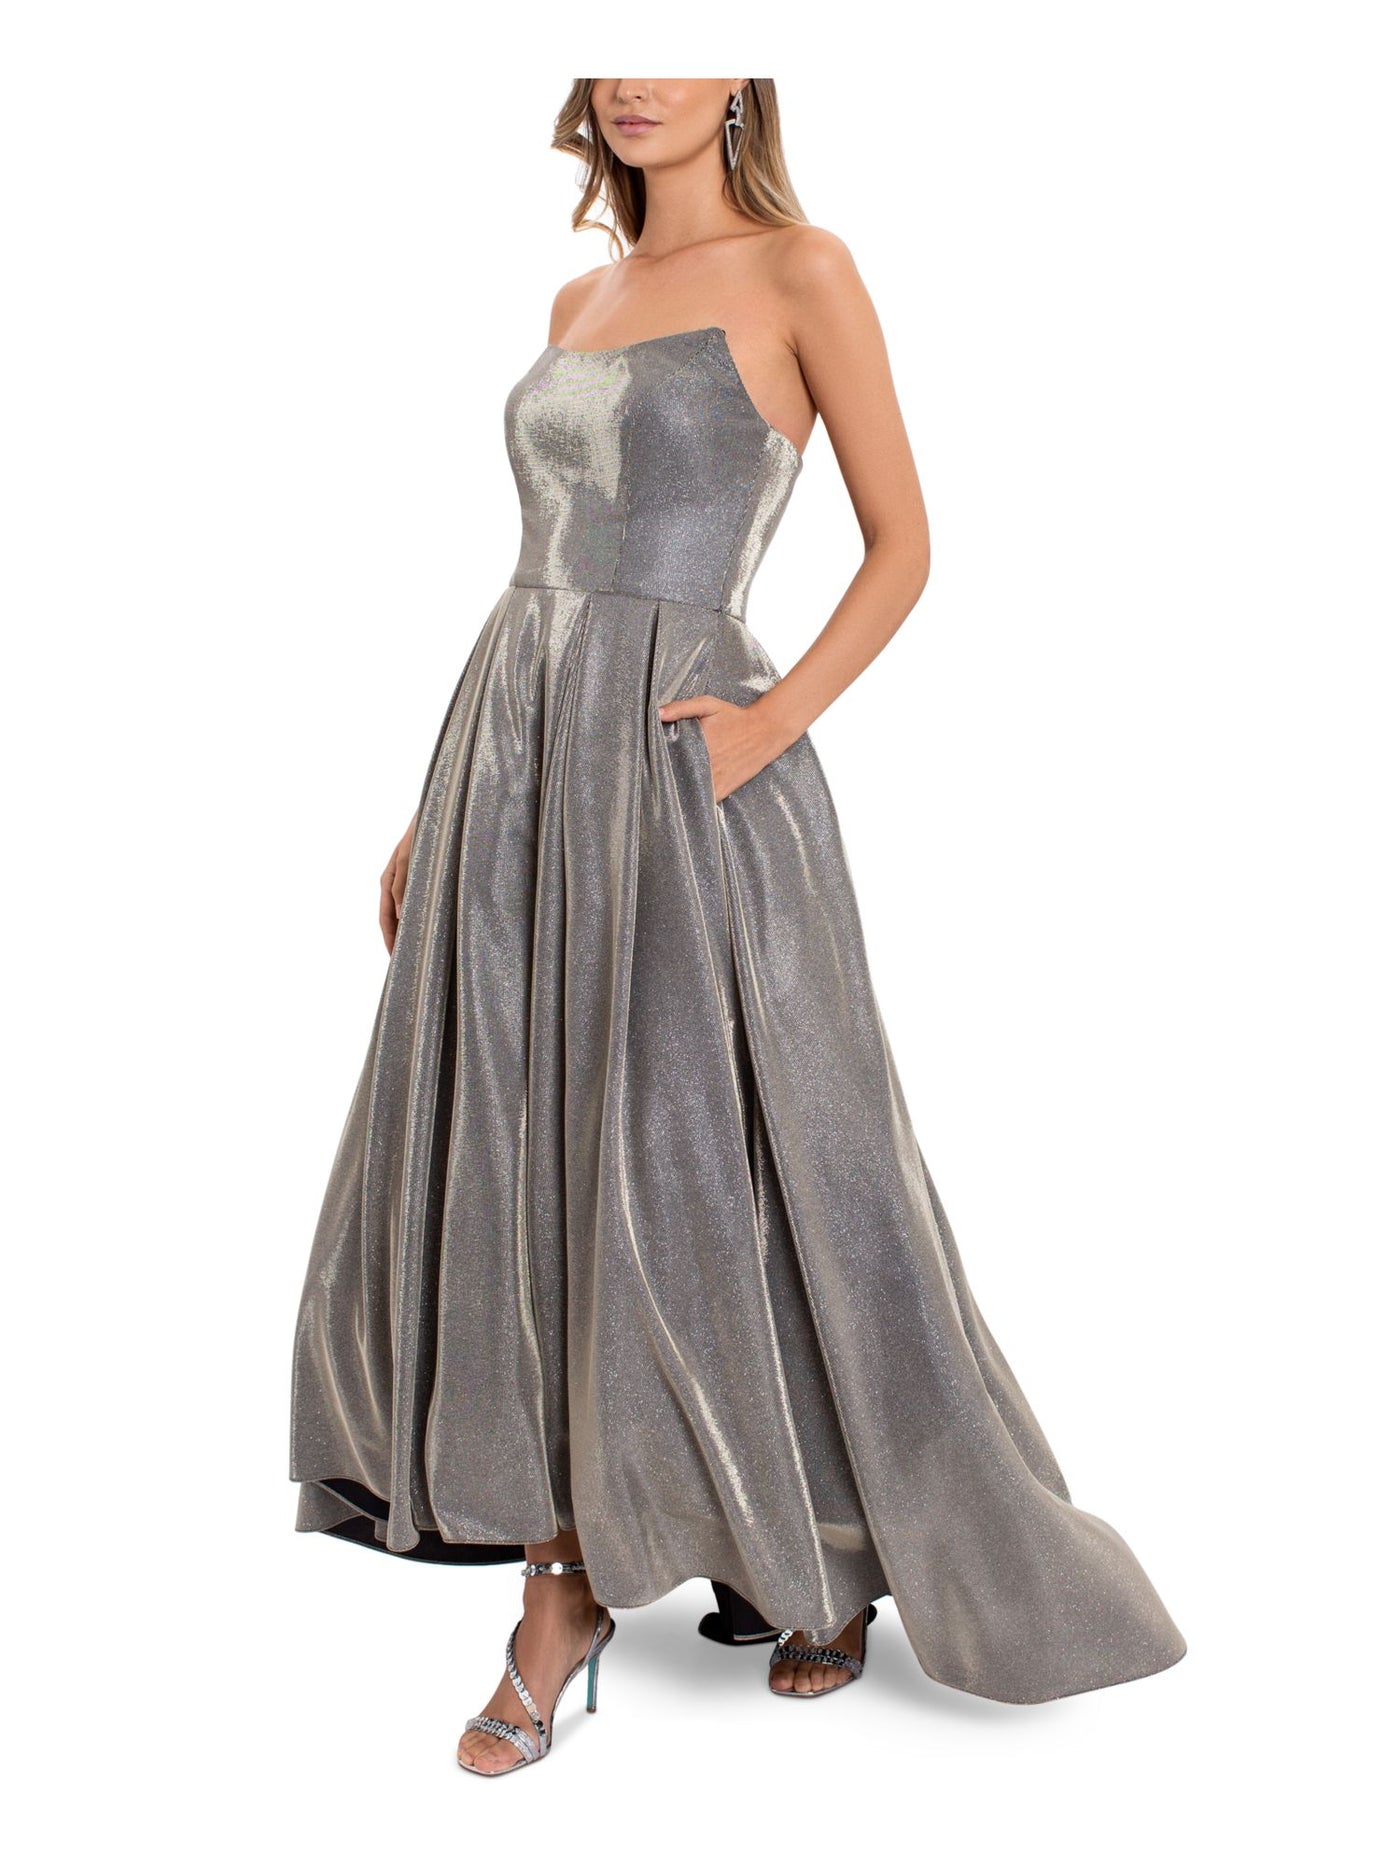 BETSY & ADAM Womens Silver Pocketed Zippered Tulle Pleated Boning Hi Lo Hem Sleeveless Strapless Full-Length Formal Gown Dress 0